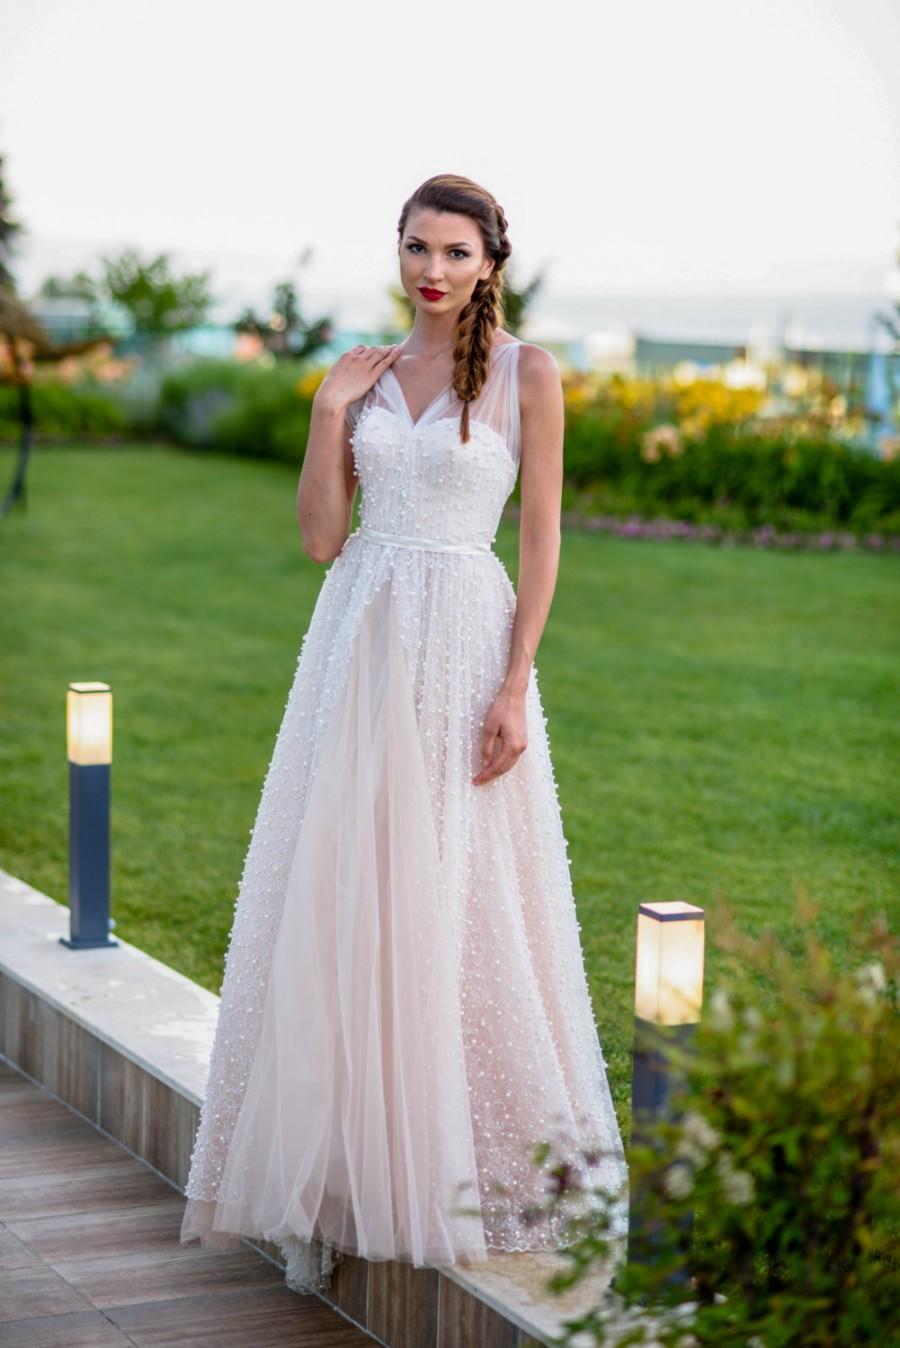 Mariage - Chic dress Prom dress Princess dress in pale pink Tulle dress Romantic gown Boho dress Formal gown Long gown Cocktail dress Sleeveless dress